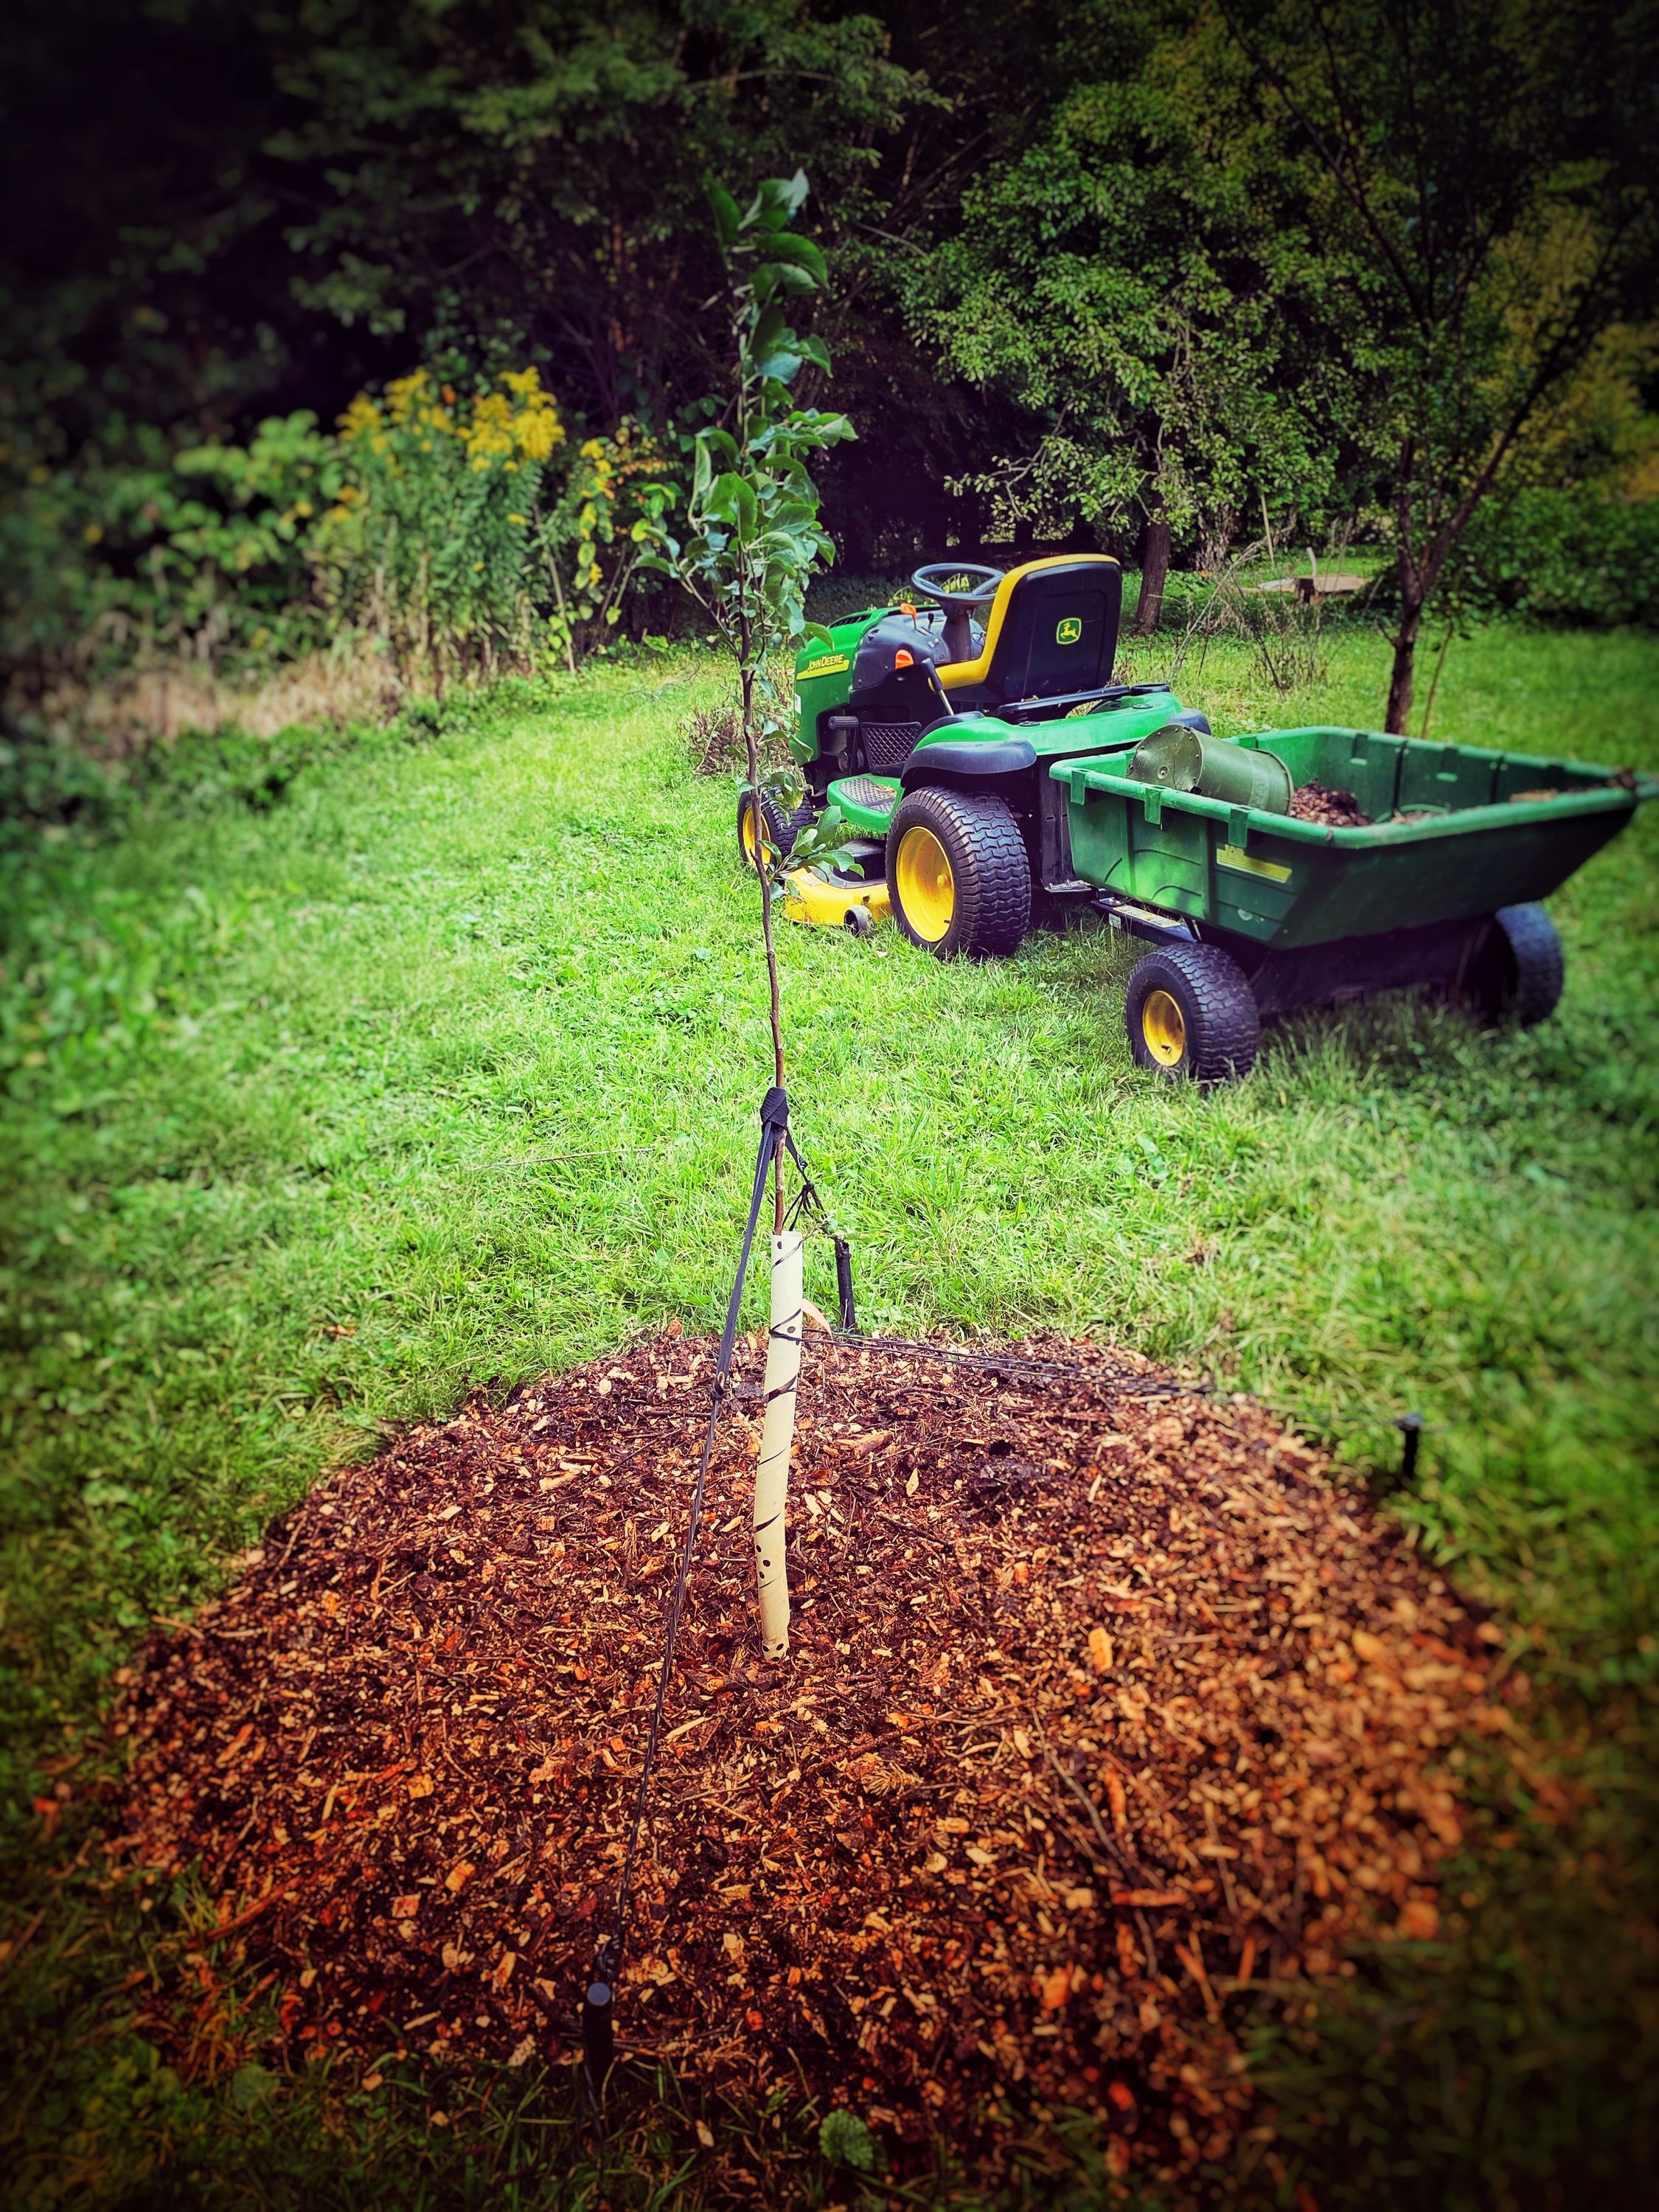 A sapling apple with recently applied wood mulch. A residential mower/tractor is in the background.